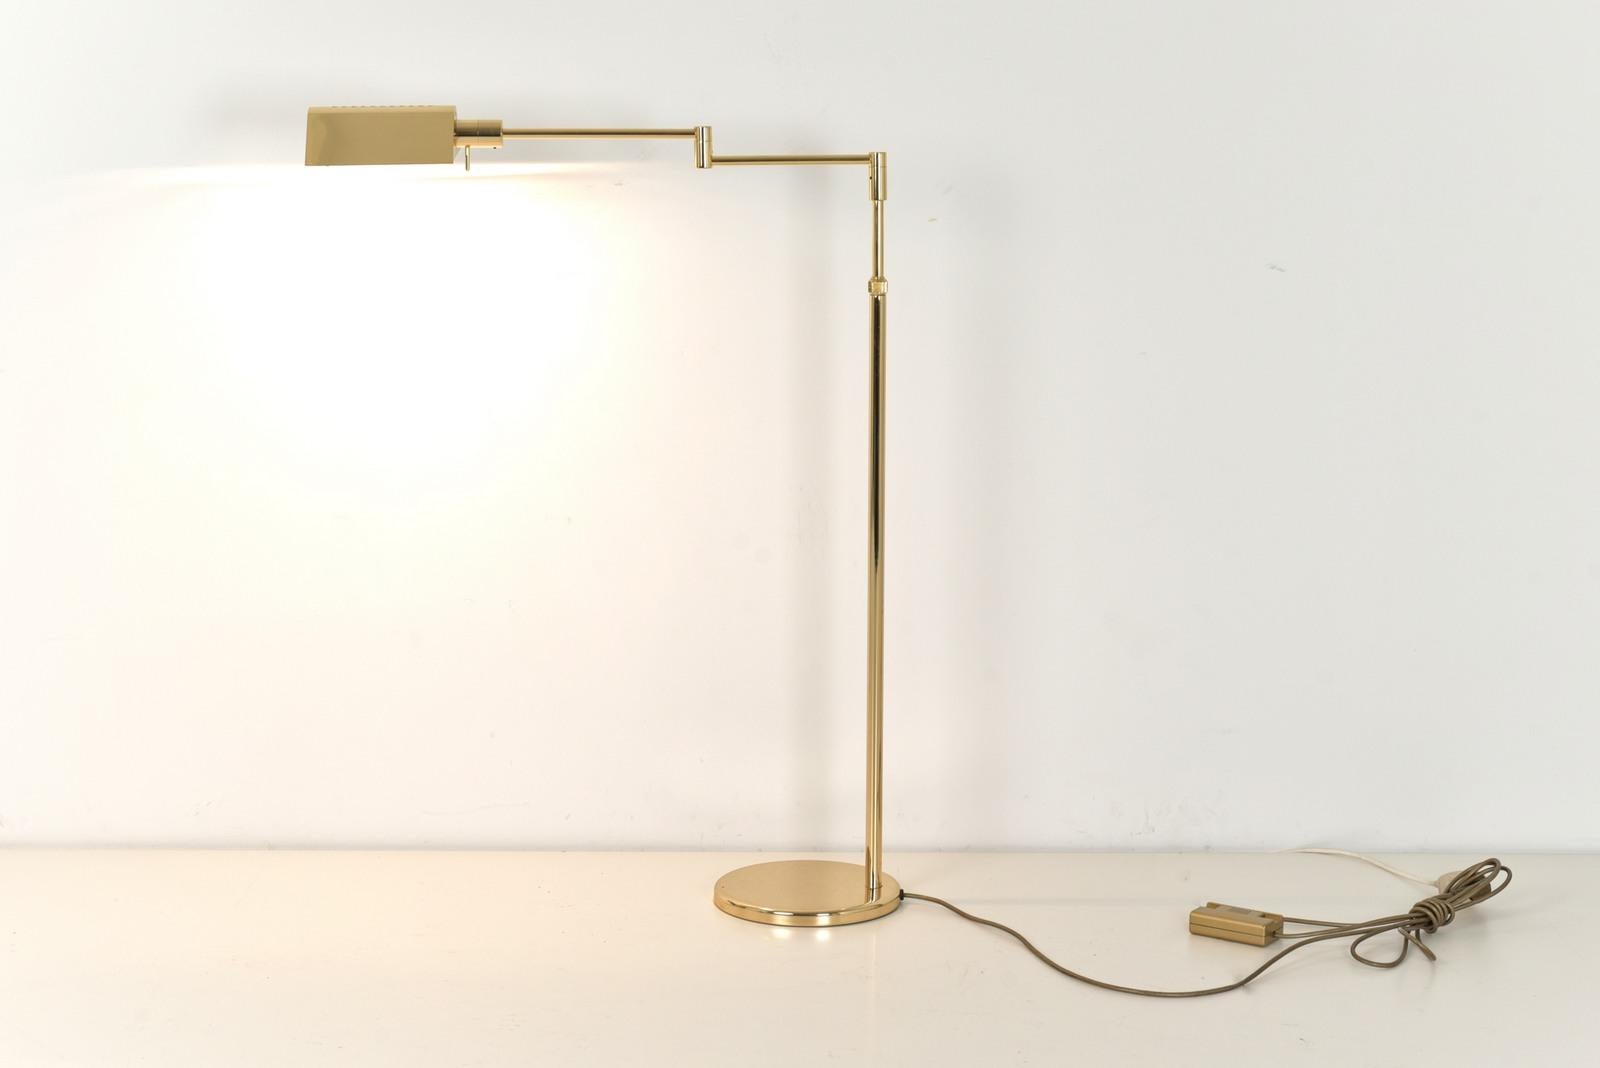 Late 20th Century Floor Lamp in Brass by Fratelli Martini, Italy - 1970s  For Sale